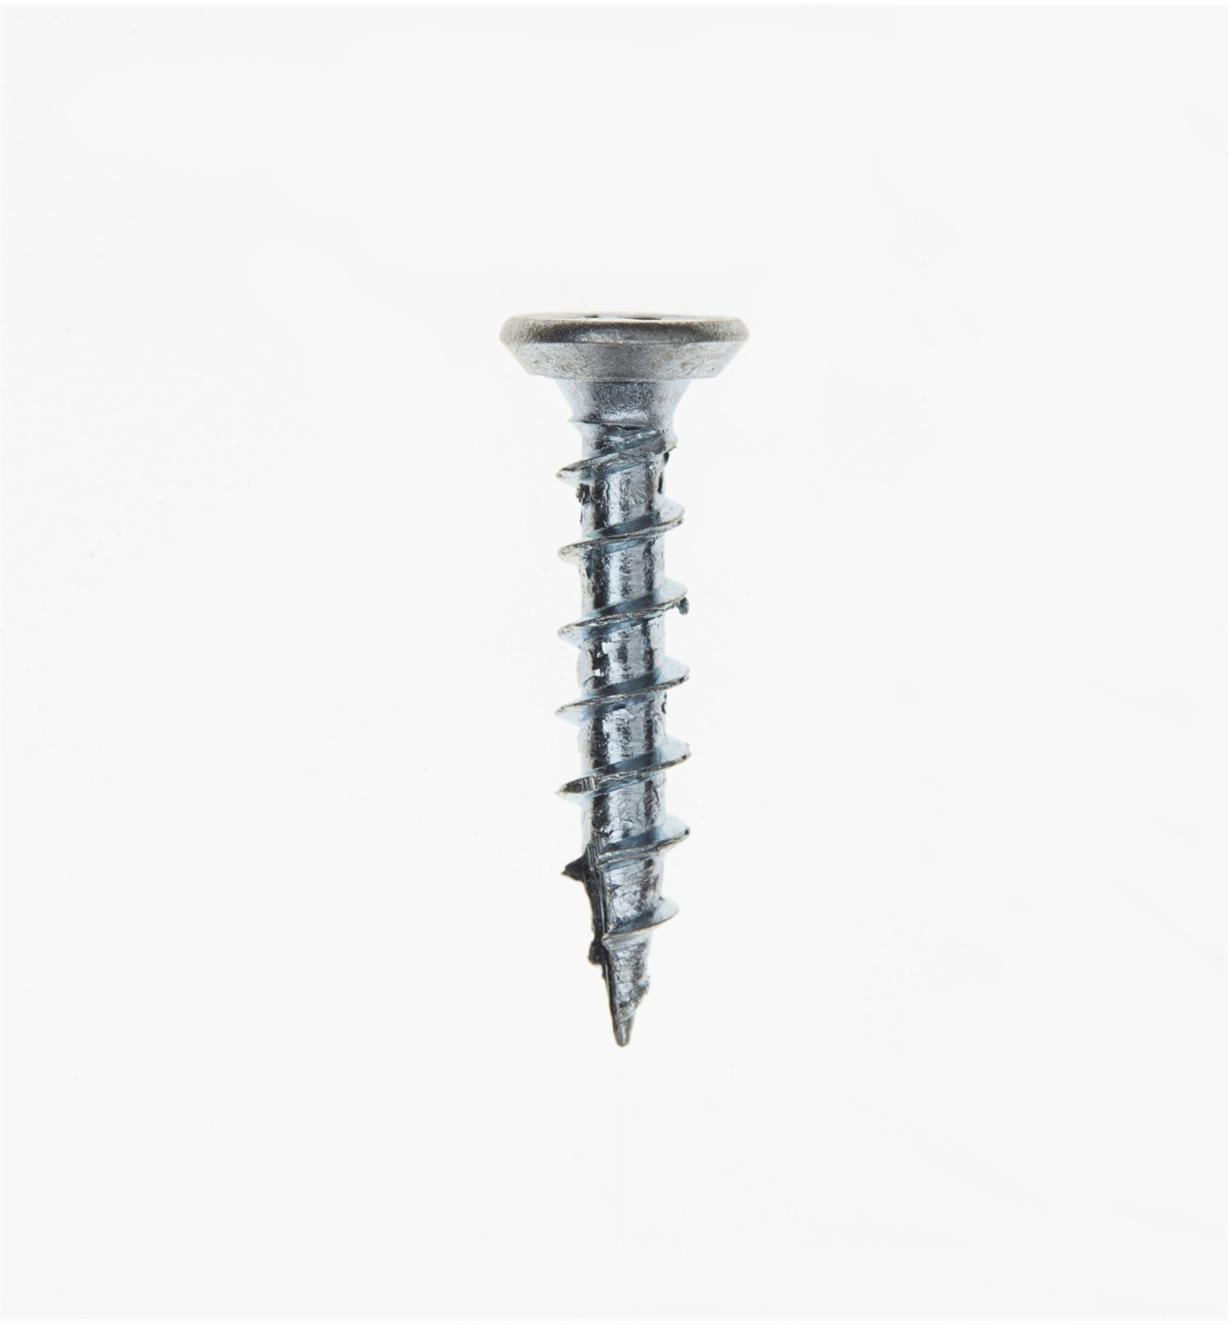 Side view of #6 × 3/4" Zinc-Plated Hinge Screw